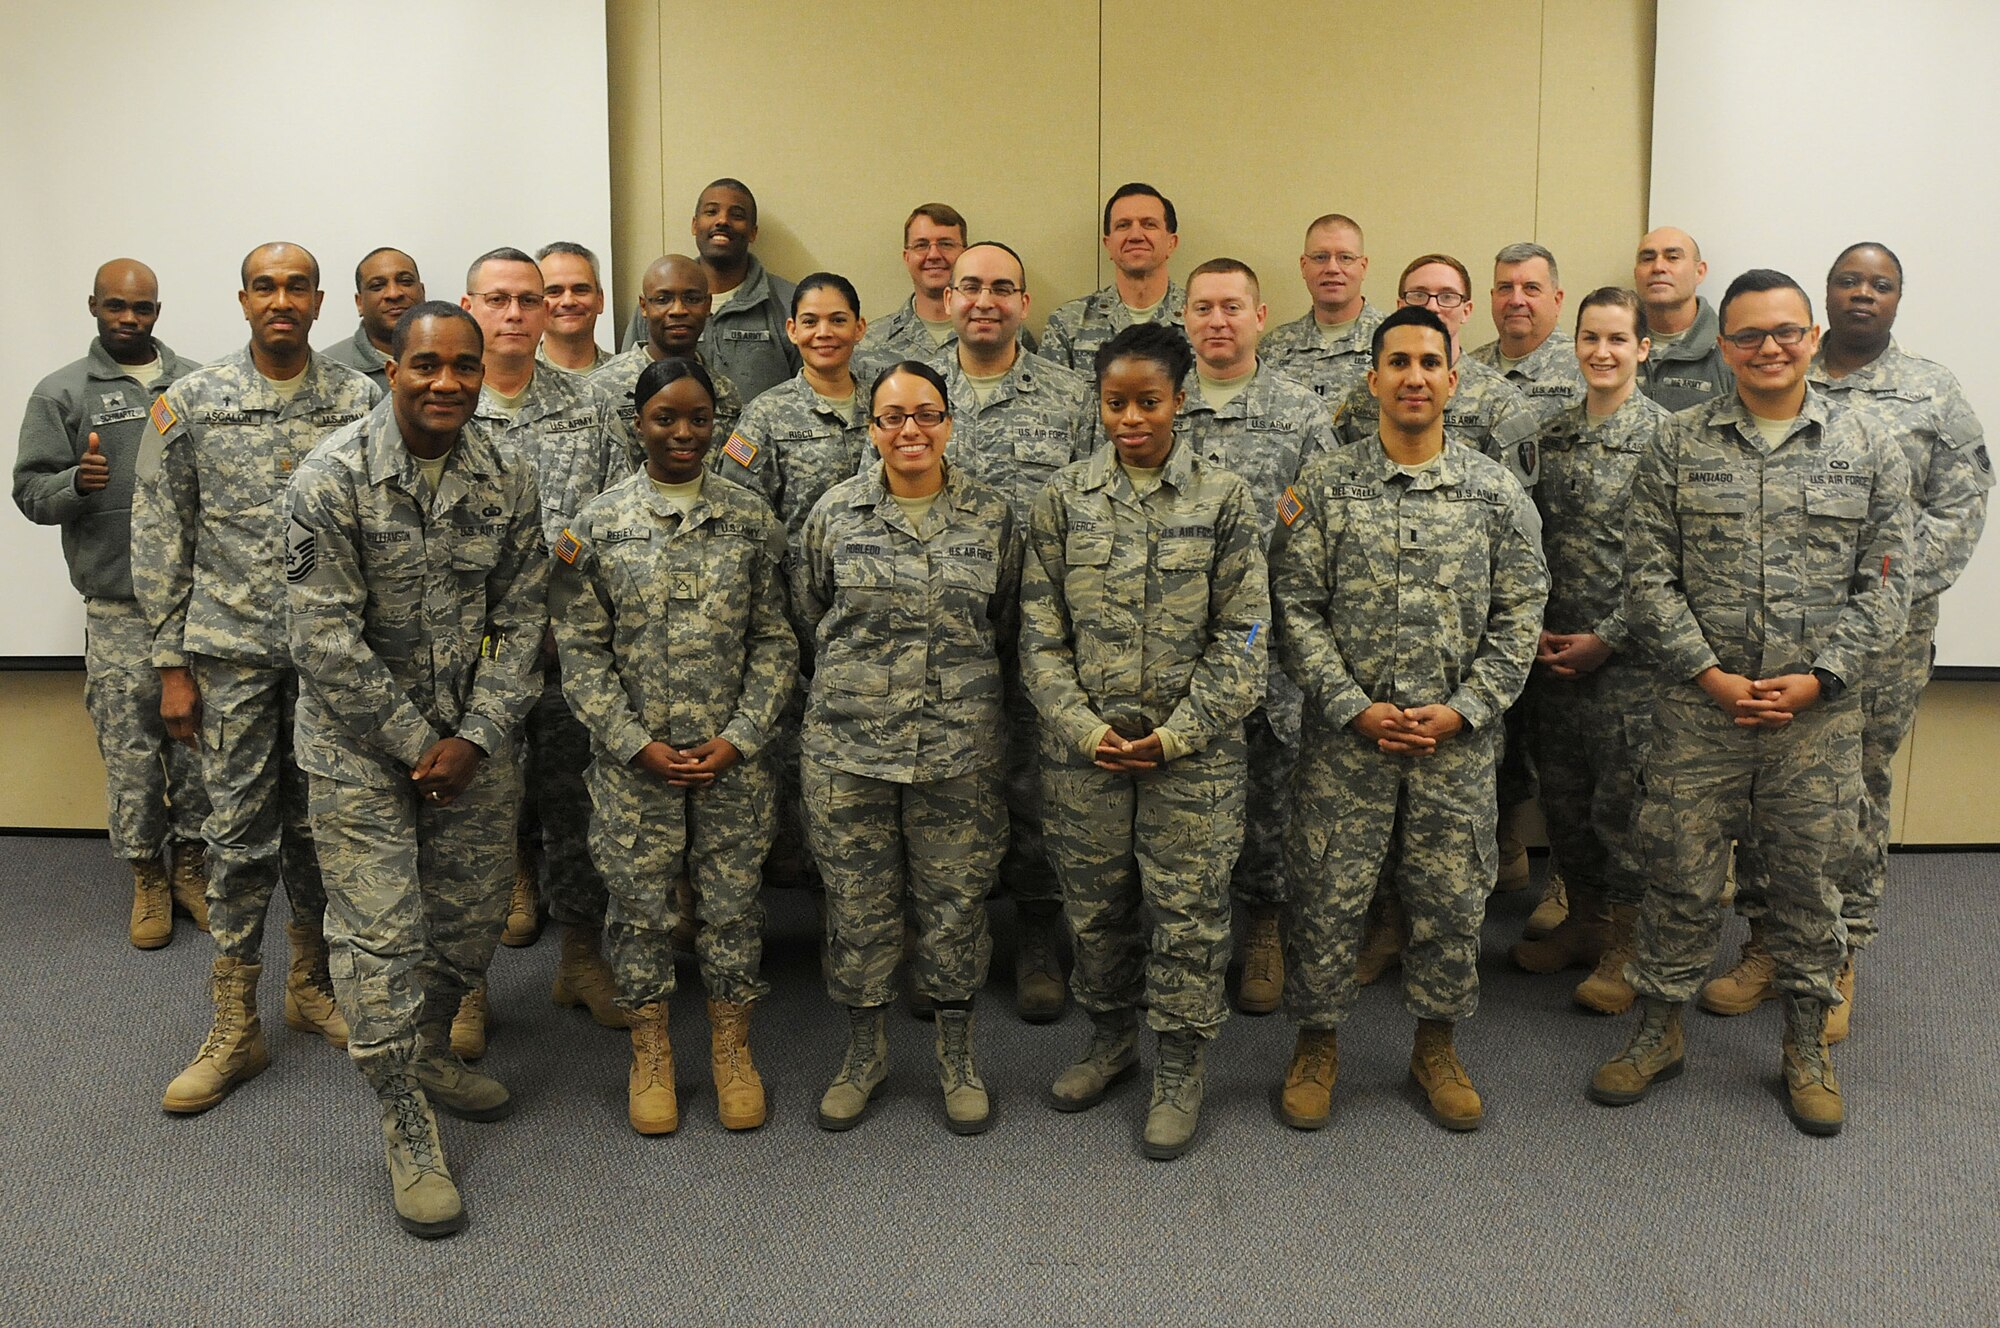 Army and Air Force chaplains and chaplain assistants from all over N.J., pose for a picture at the end of the Traumatic Event Management Course Jan. 16, 2015, at Joint Base McGuire-Dix-Lakehurst, N.J. The Army's TEM course was a week long and focused on unit cohesion and effectiveness to help manage crisis situations. The course used group activities and role playing to reinforce the lessons. At the end of the week, the students are able to take what they learned and bring it back to their units. (U.S. Air National Guard Photo by Airman 1st Class Julia Pyun/Released)